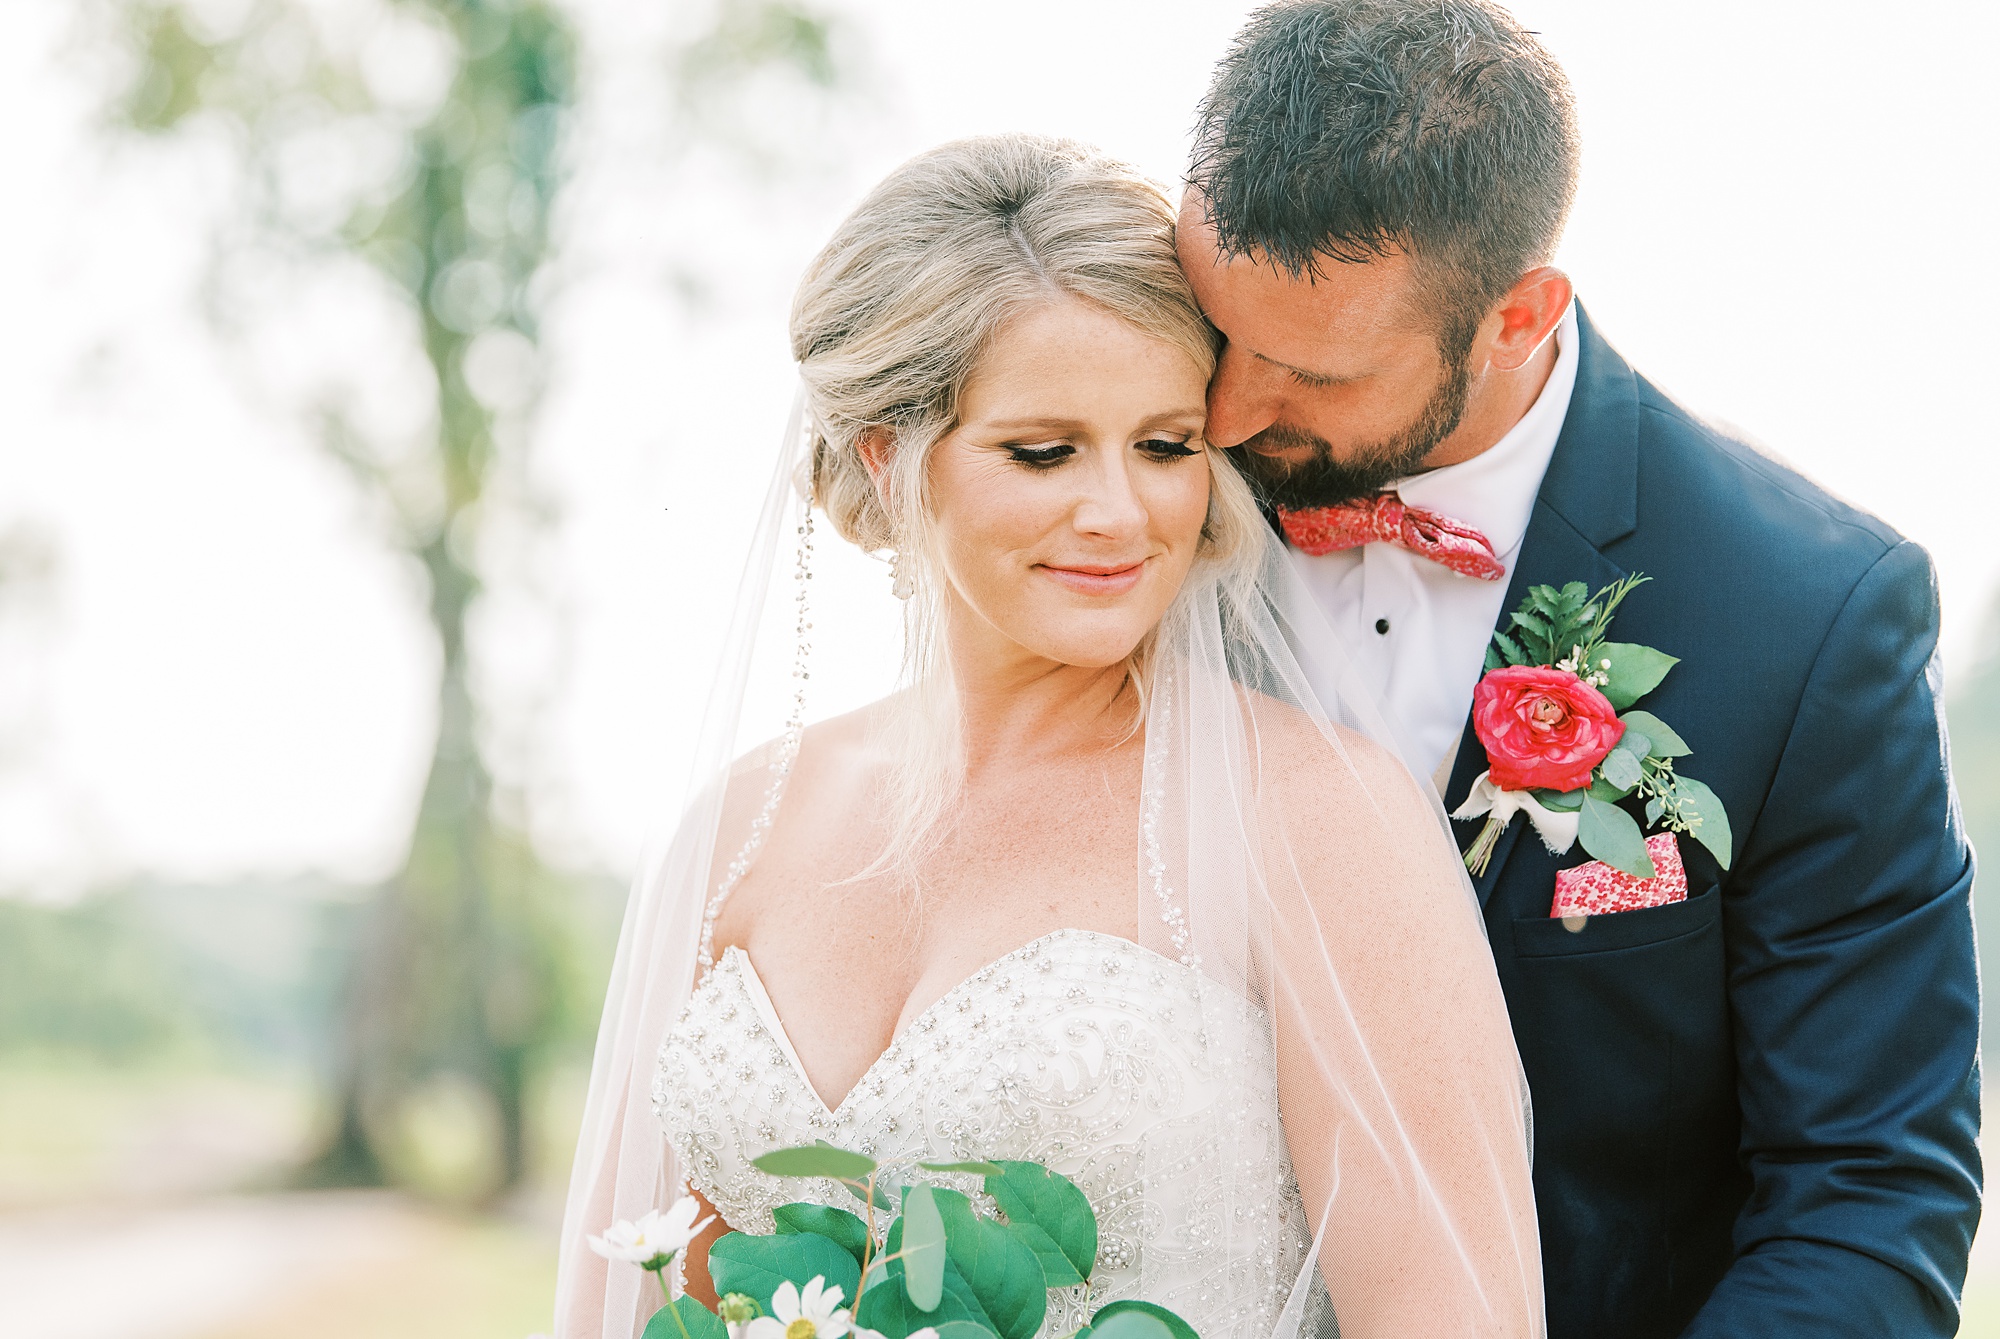 groom whispers in bride's ear during wedding photos